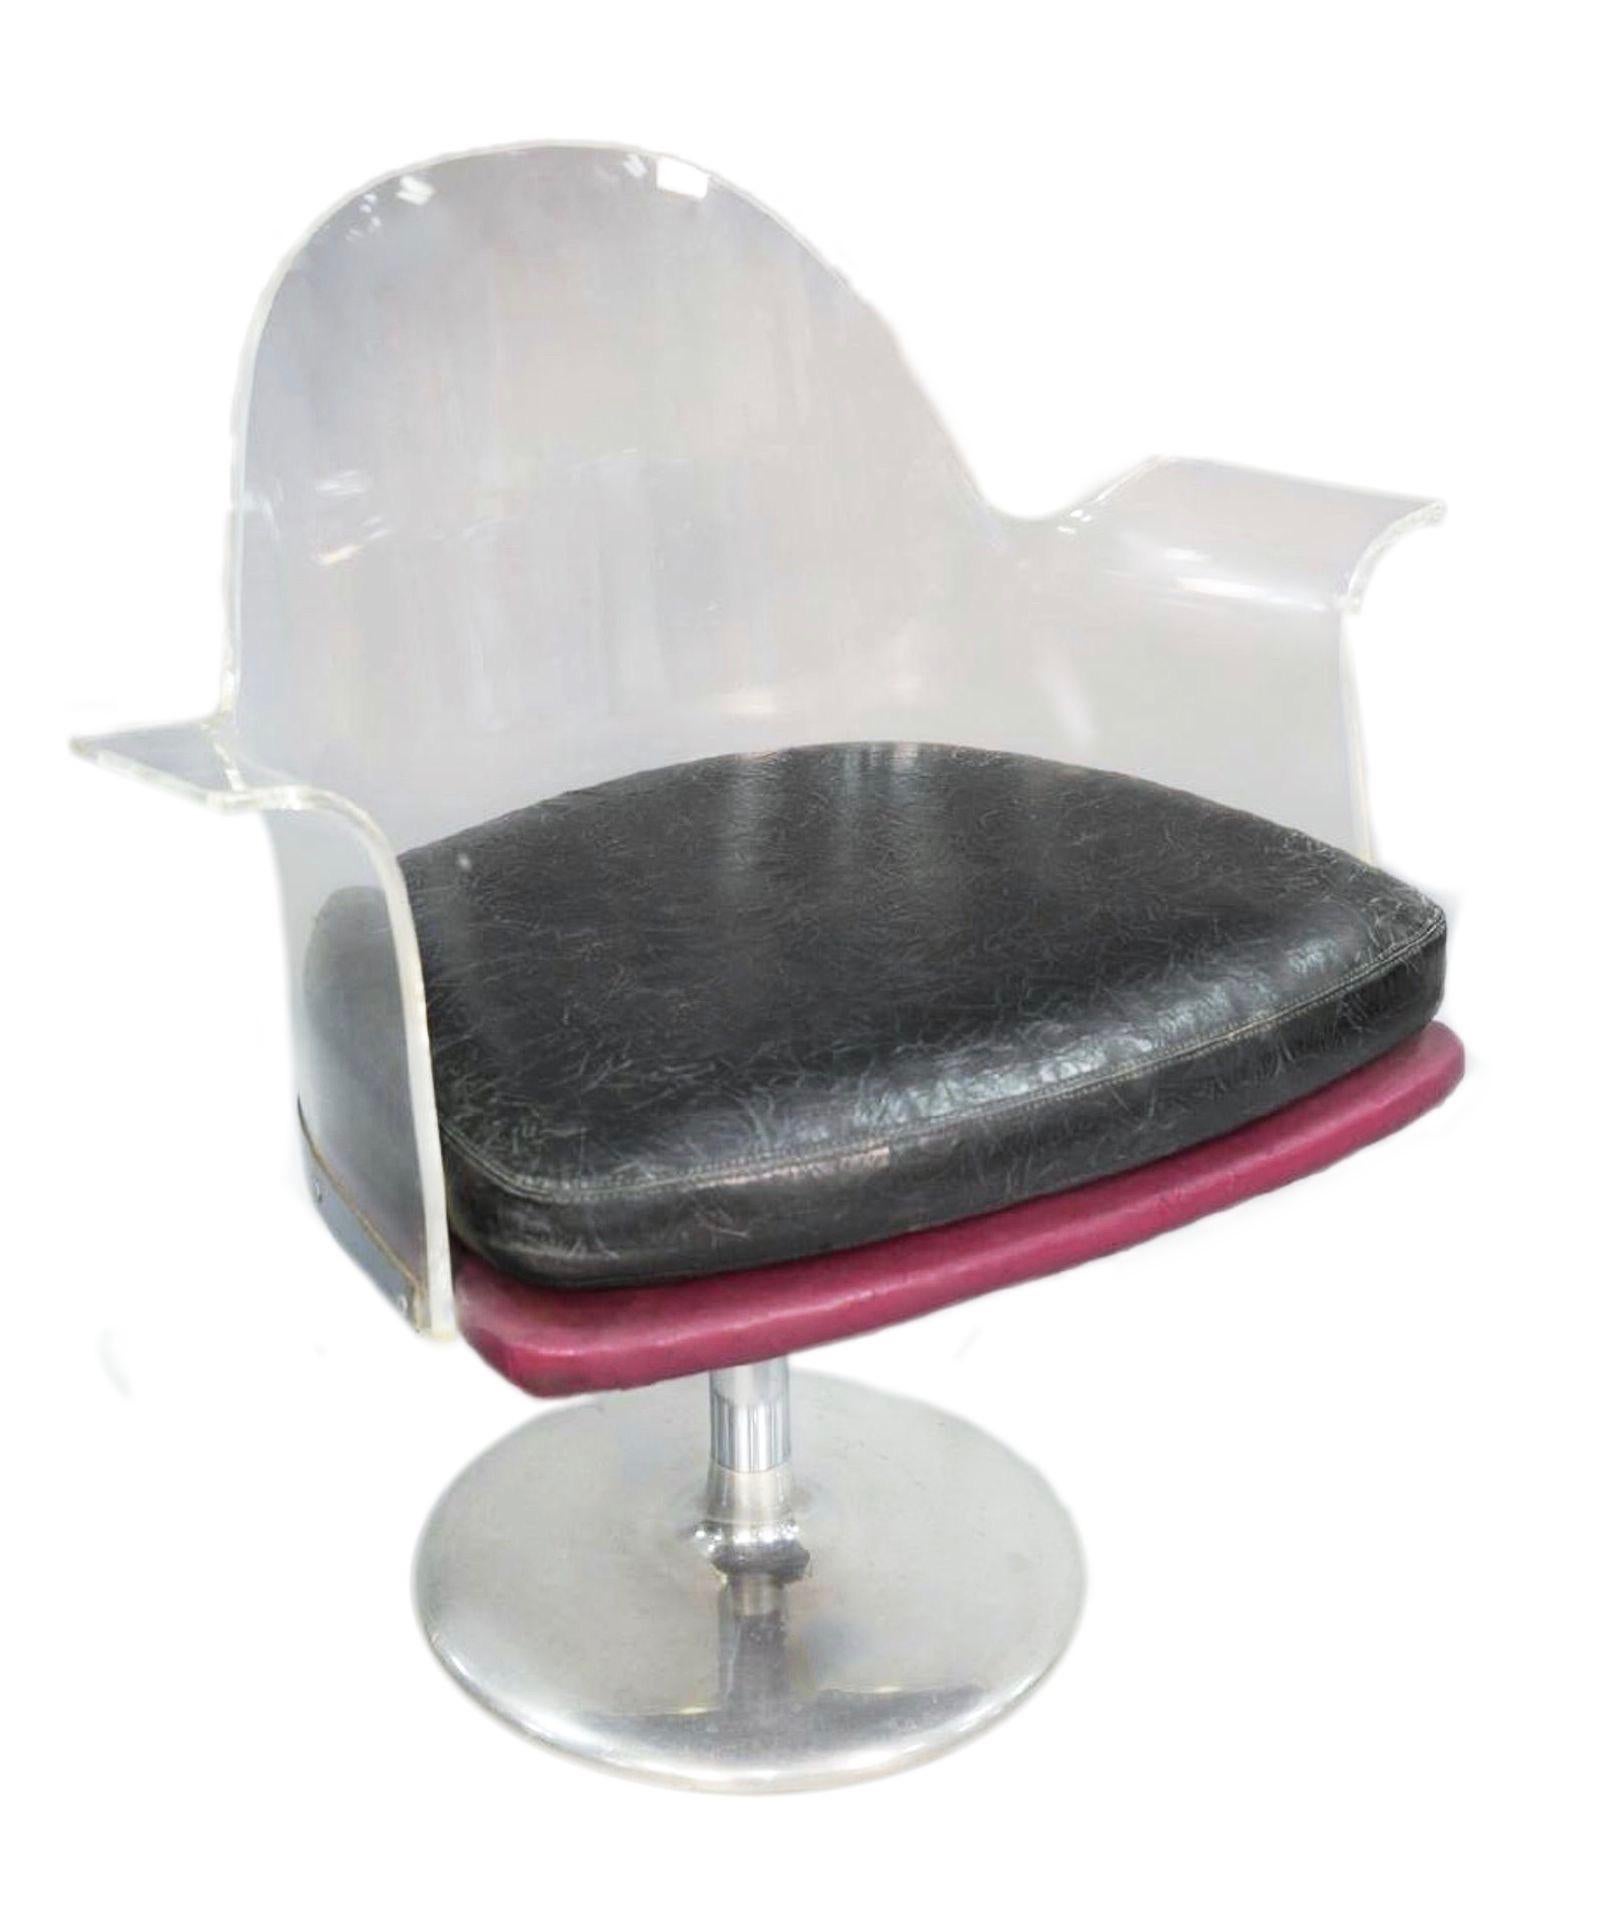 Vintage lucite swivel armchair, steel tulip base, circa 1970. 
Curved Lucite back and arms, single piece, on steel pedestal base, with original leatherette upholstery. 
Measures: H 30.25 in. x W 28.75 in. x D 20.5 in.


